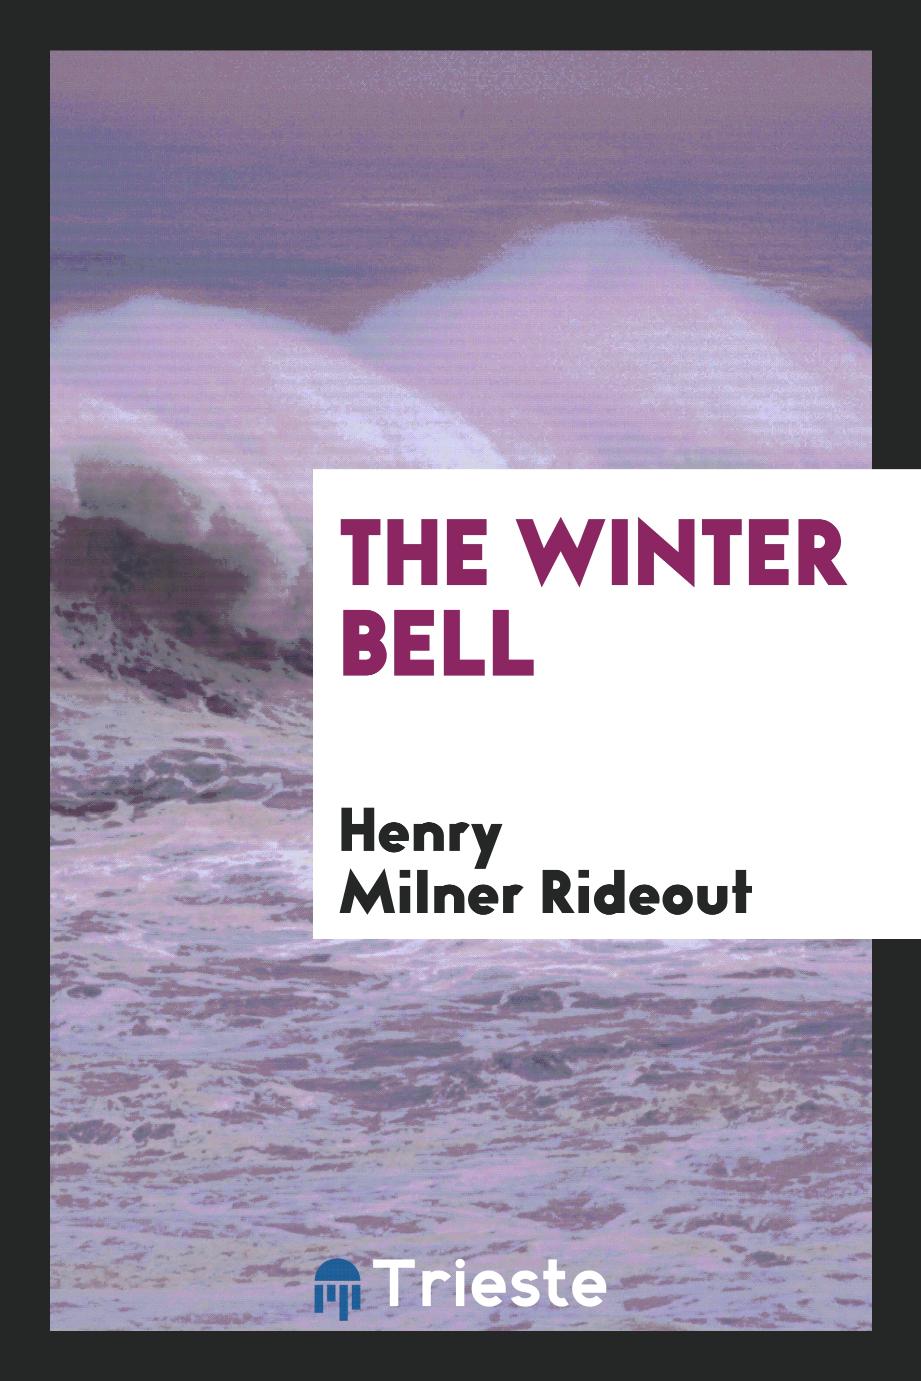 The winter bell